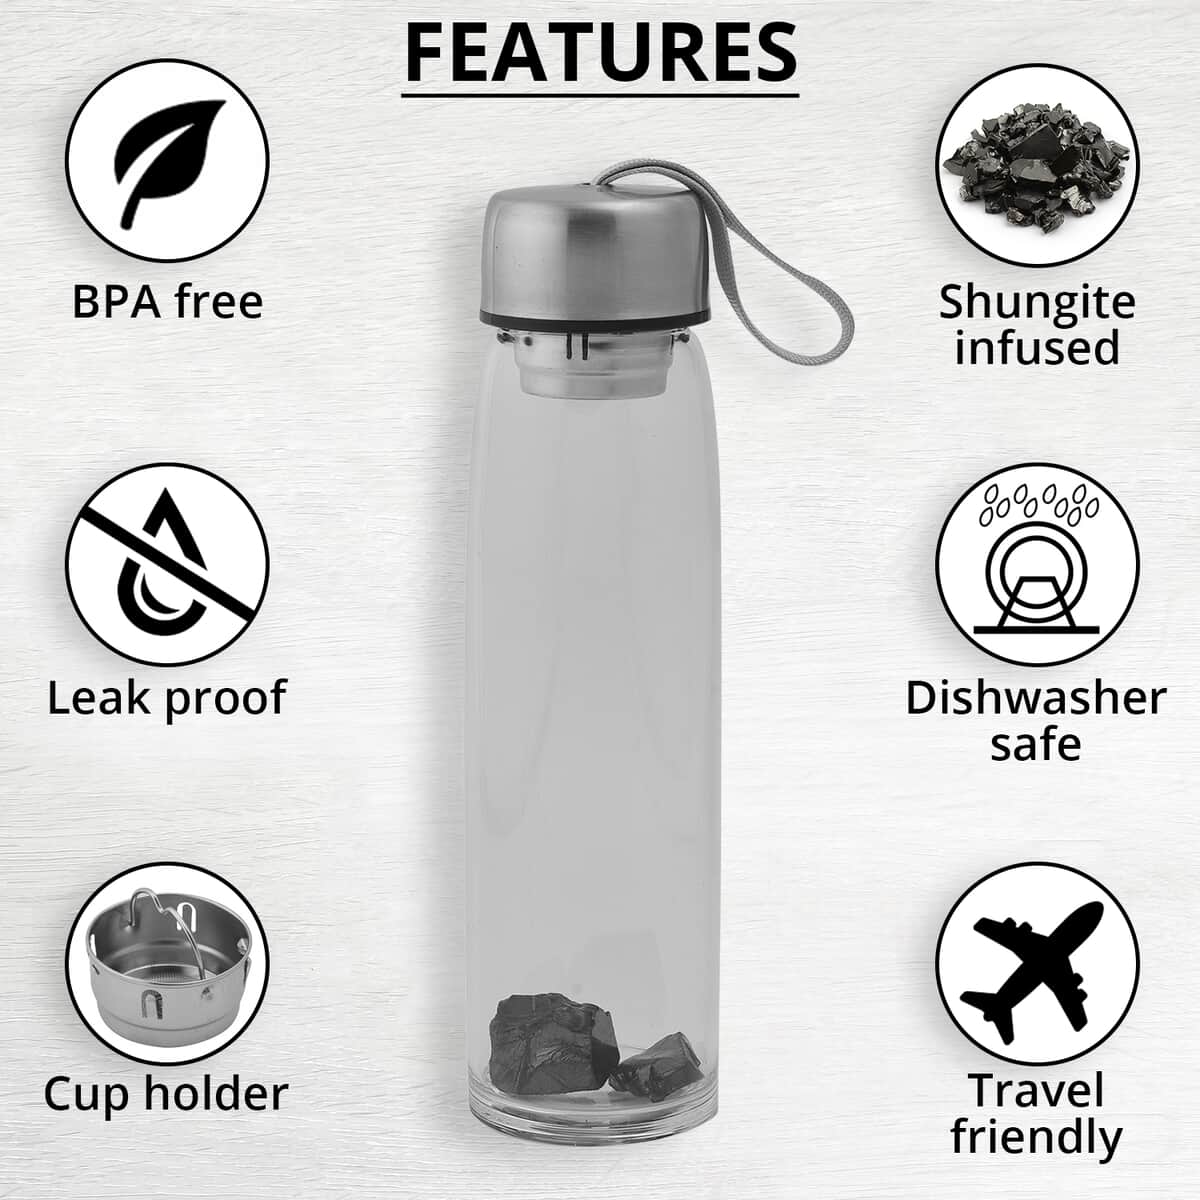 Silver Color Stainless Steel and Glass Elite Shungite Filter Infuser Water Bottle 16.9oz image number 2